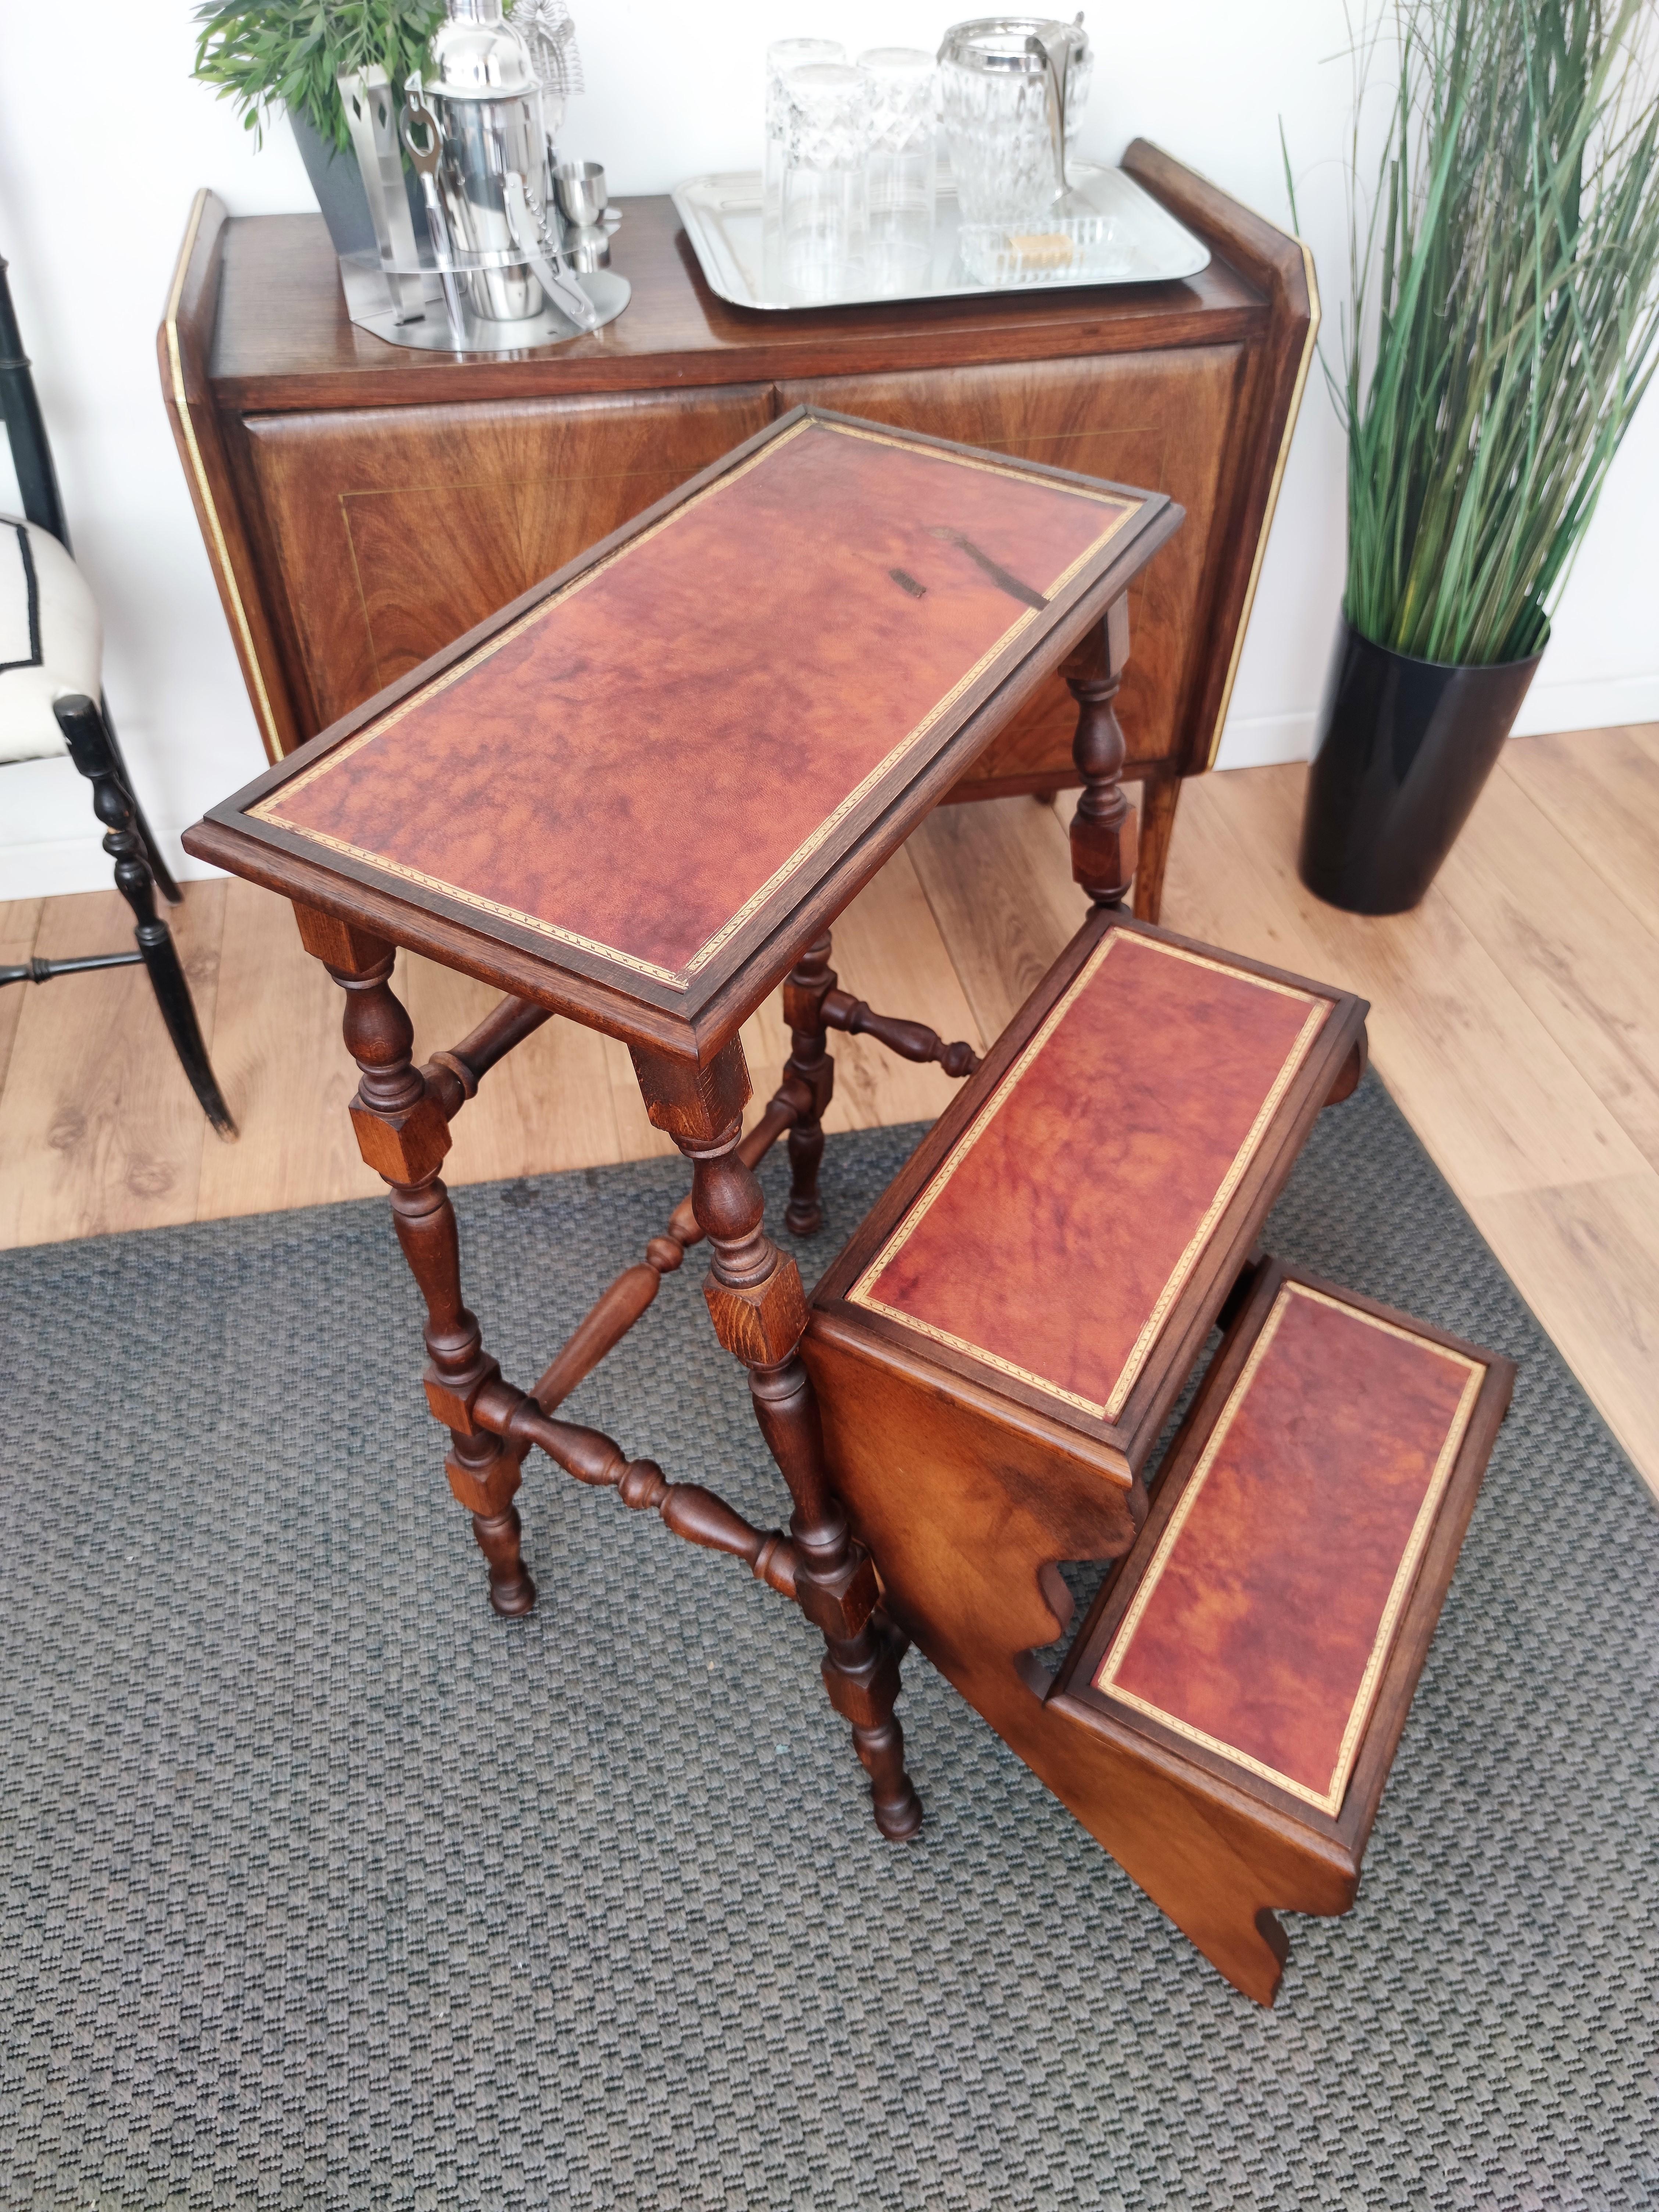 Beautiful Italian carved walnut wood foldable step ladder with three stairs with great twisted turned legs. Each step is upholstered with the original red leather decorated with gold tooling motifs. Versatile and practical, the elegant library